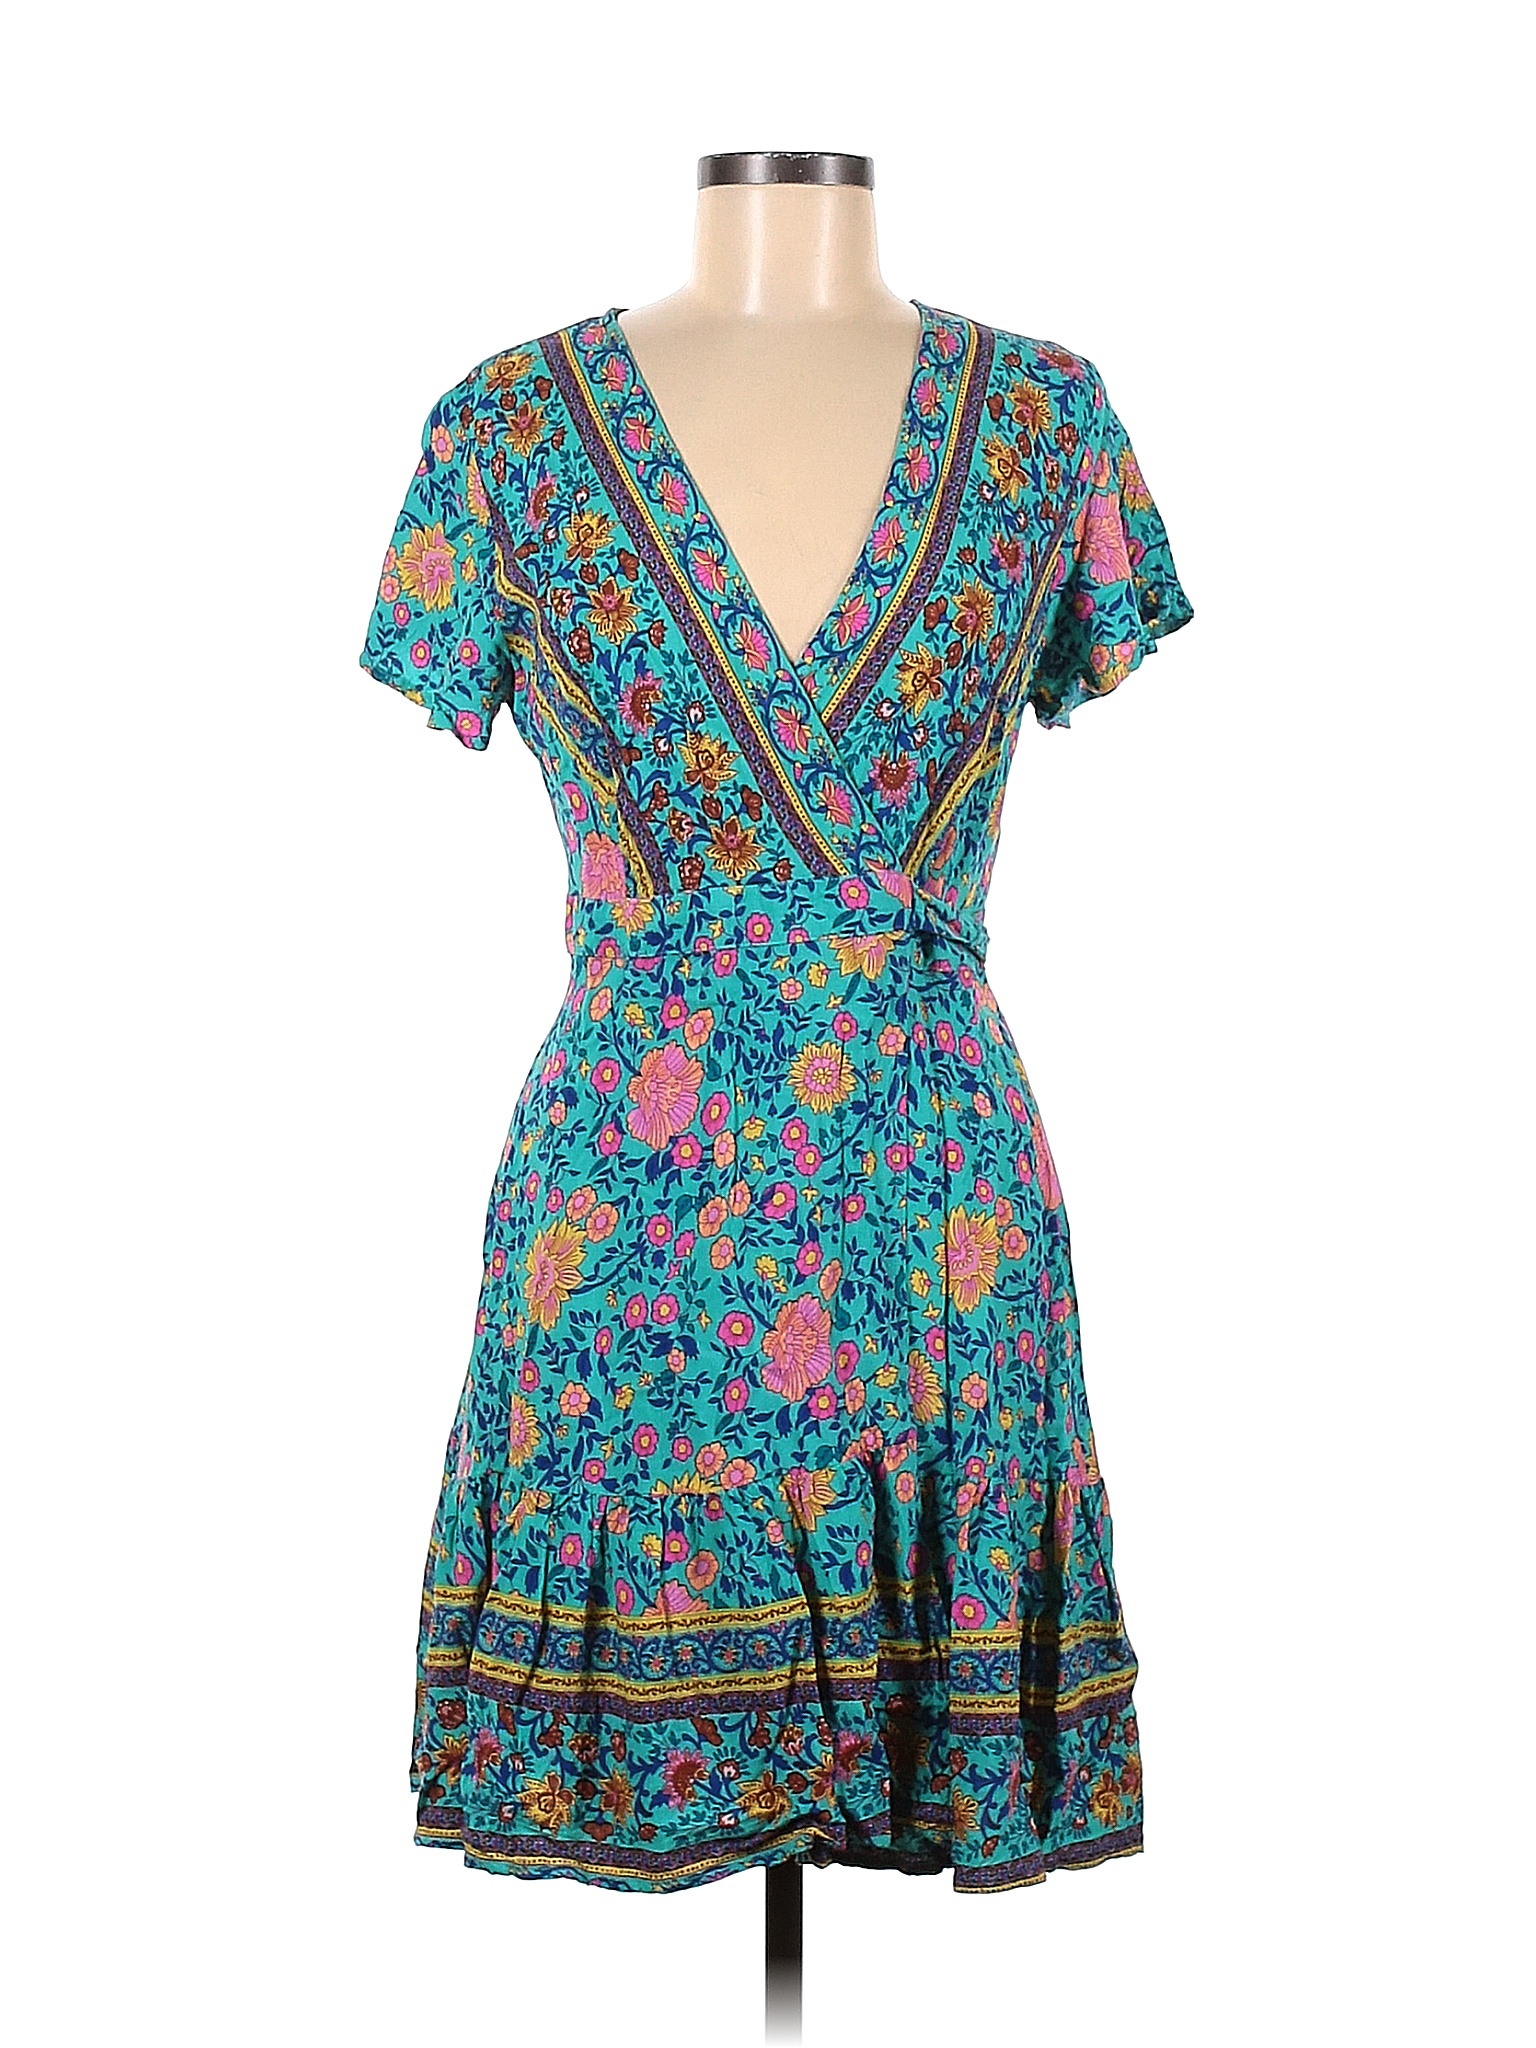 Zesica Women's Dresses On Sale Up To 90% Off Retail | thredUP